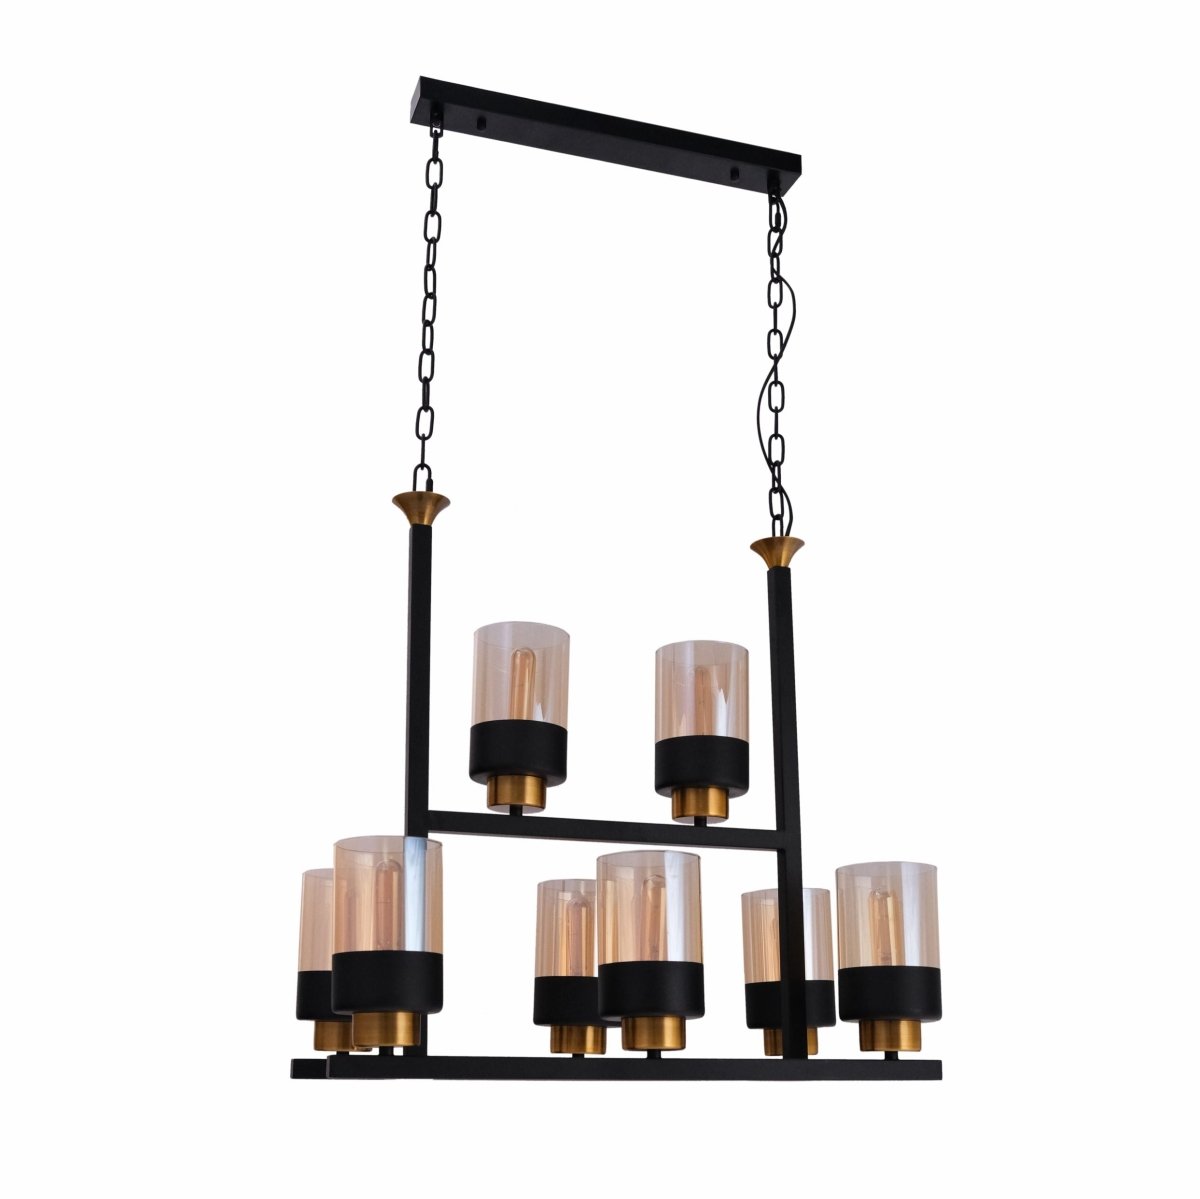 Main image of Amber Cylinder Glass Black Metal Chandelier with 8xE27 Fitting | TEKLED 158-19586